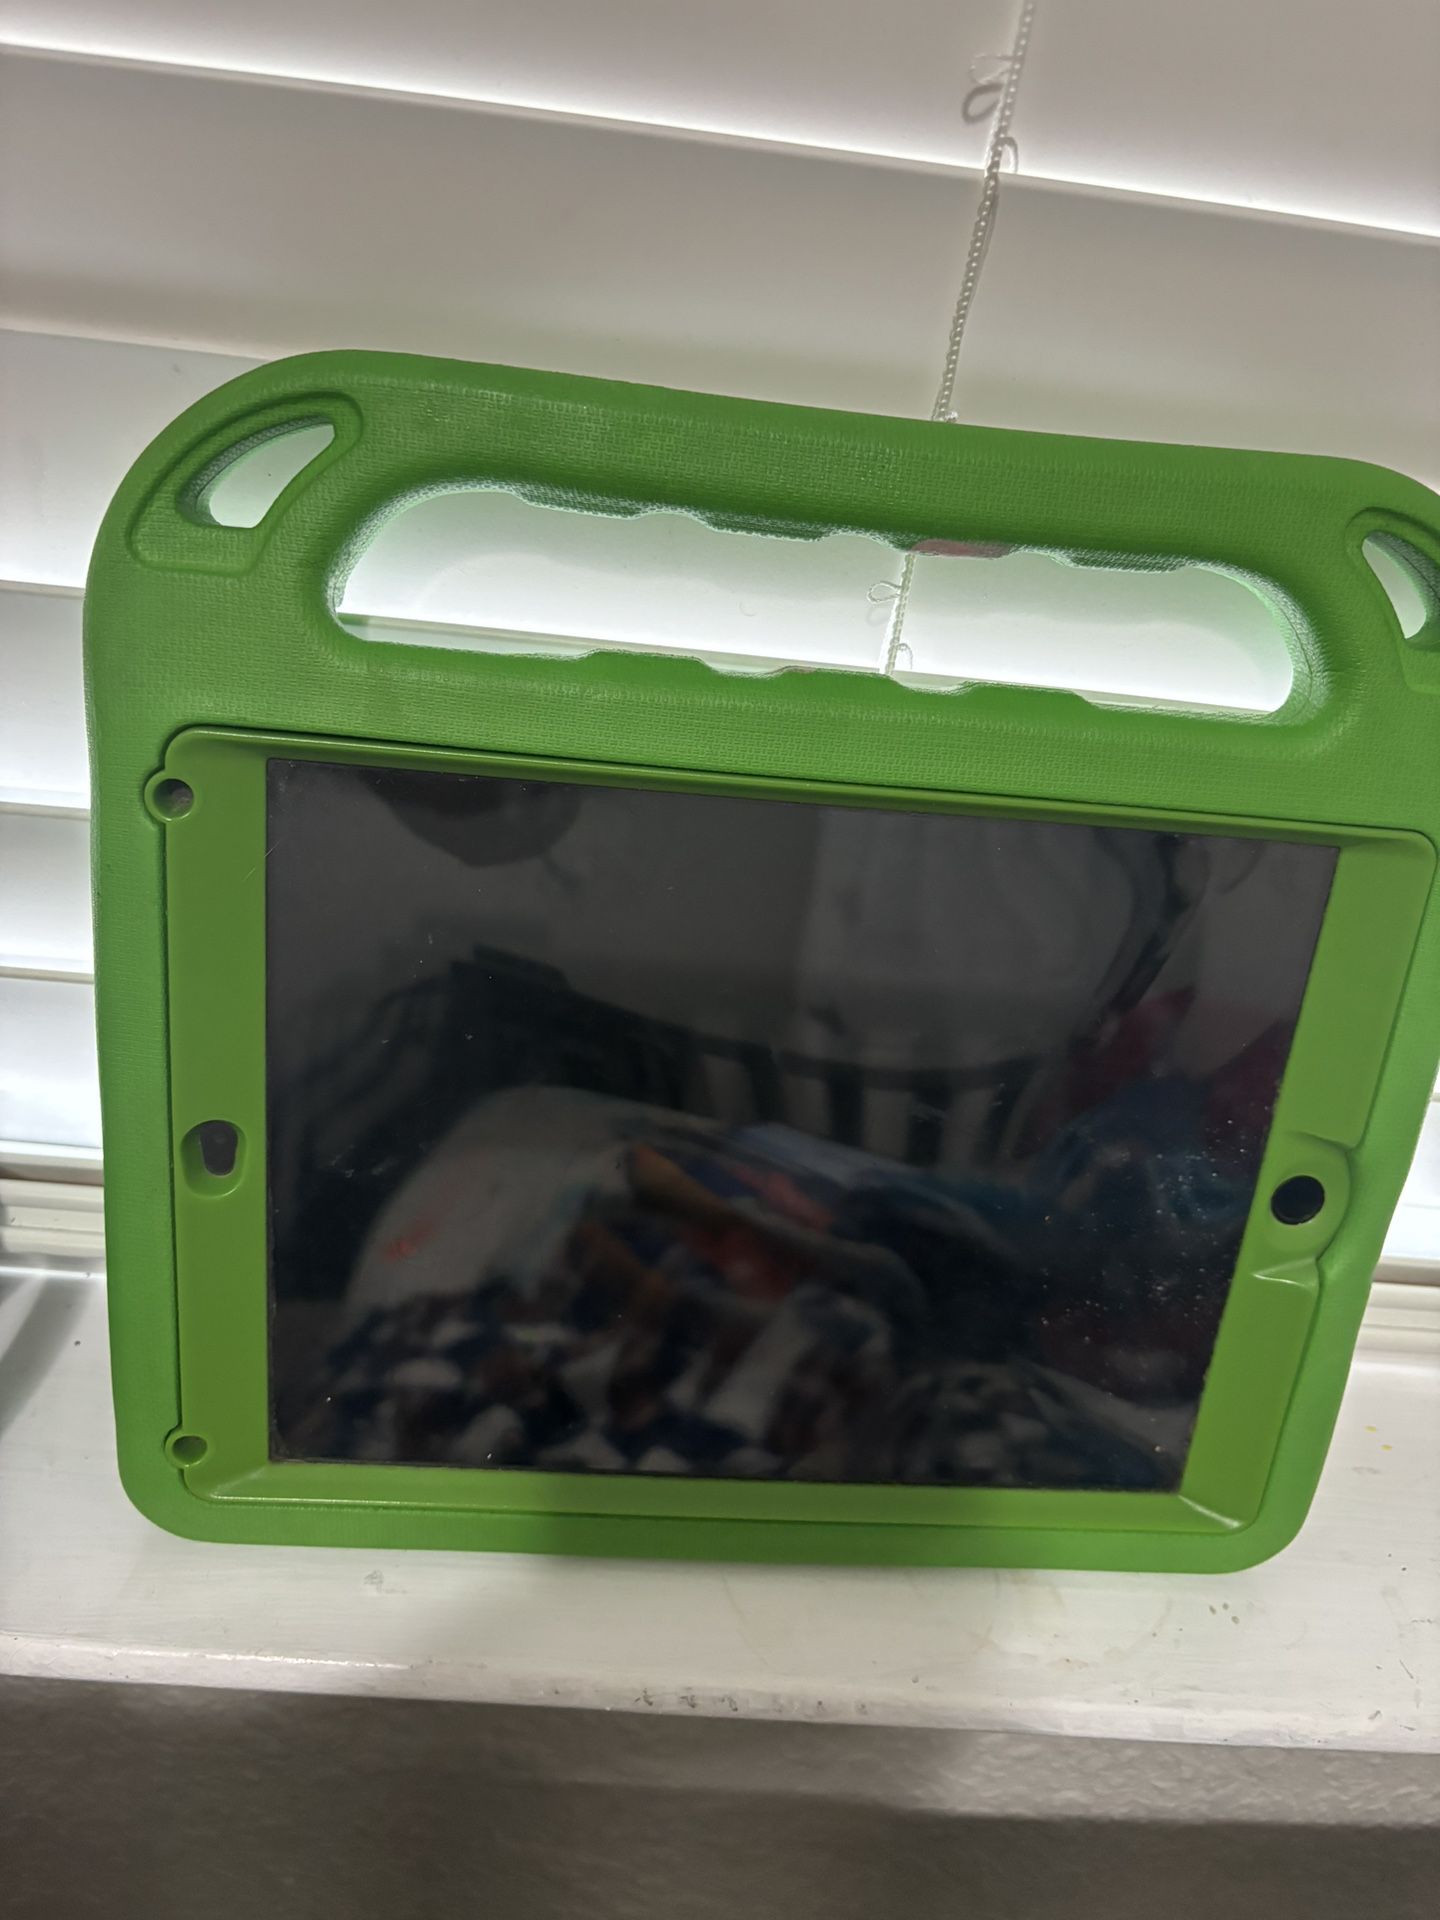 6th Gen iPad For Sale 